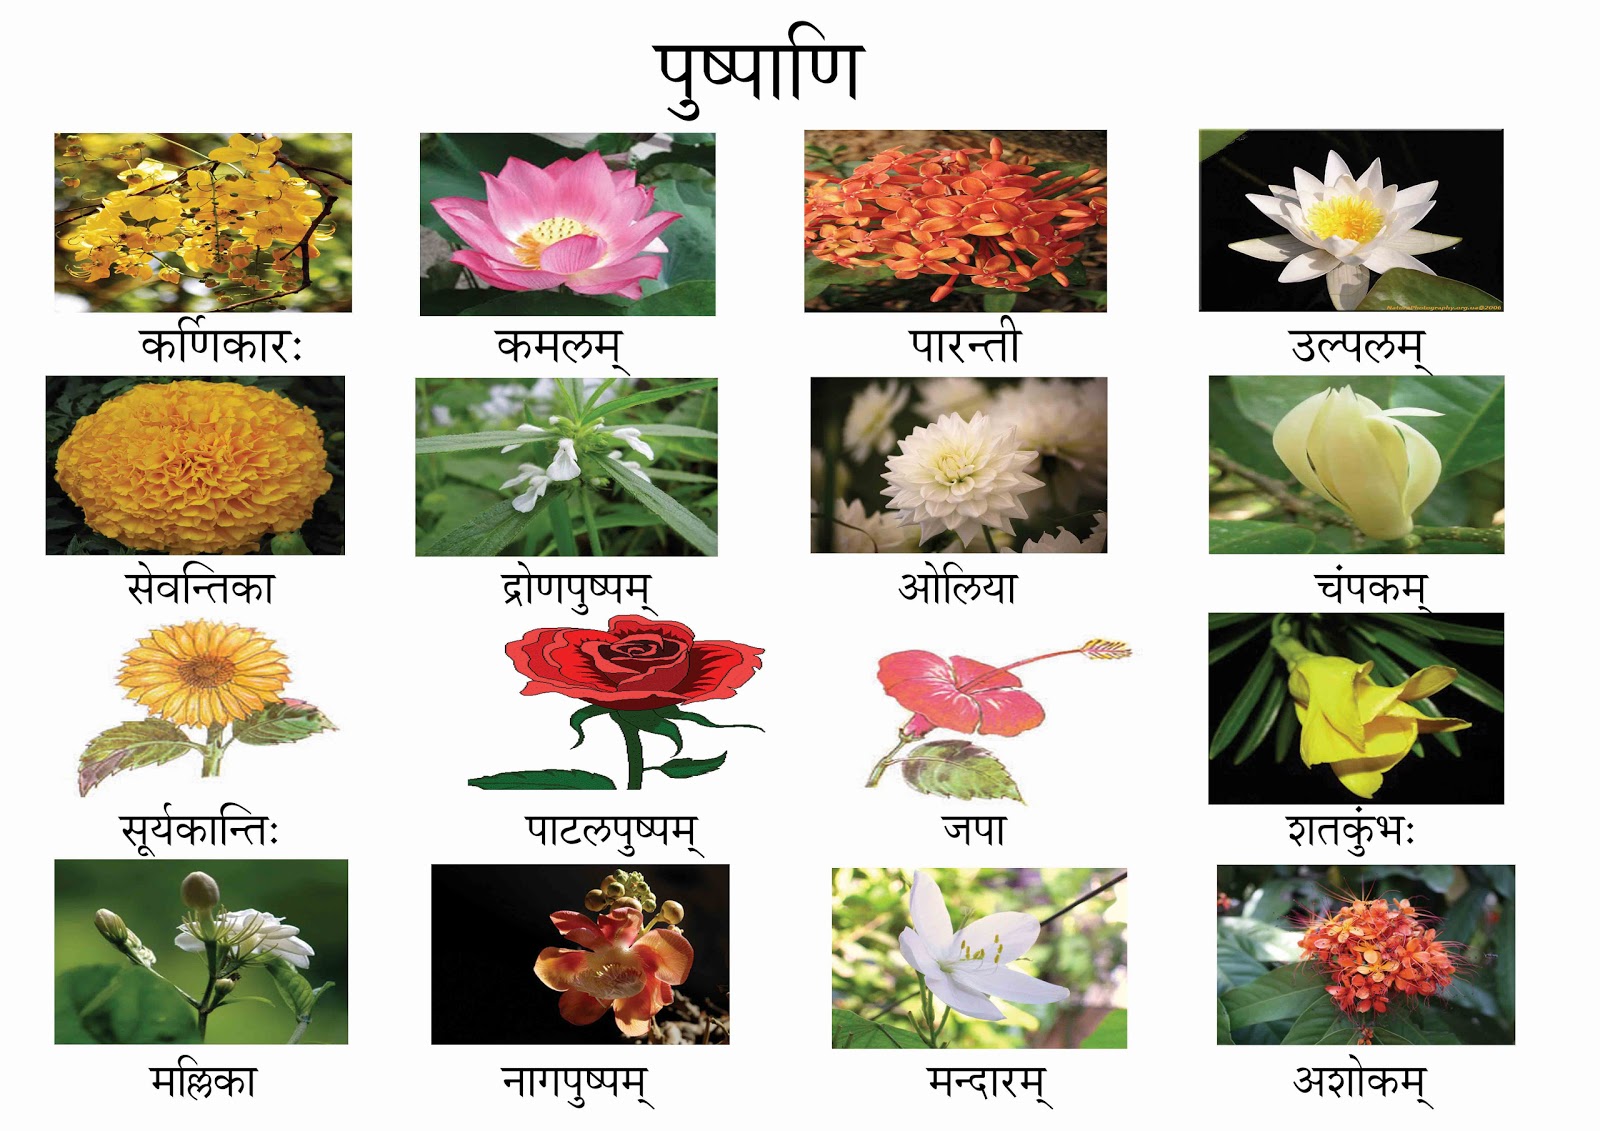 15 Flowers Name And Images In Hindi Top Collection Of Different Types Of Flowers In The Images Hd